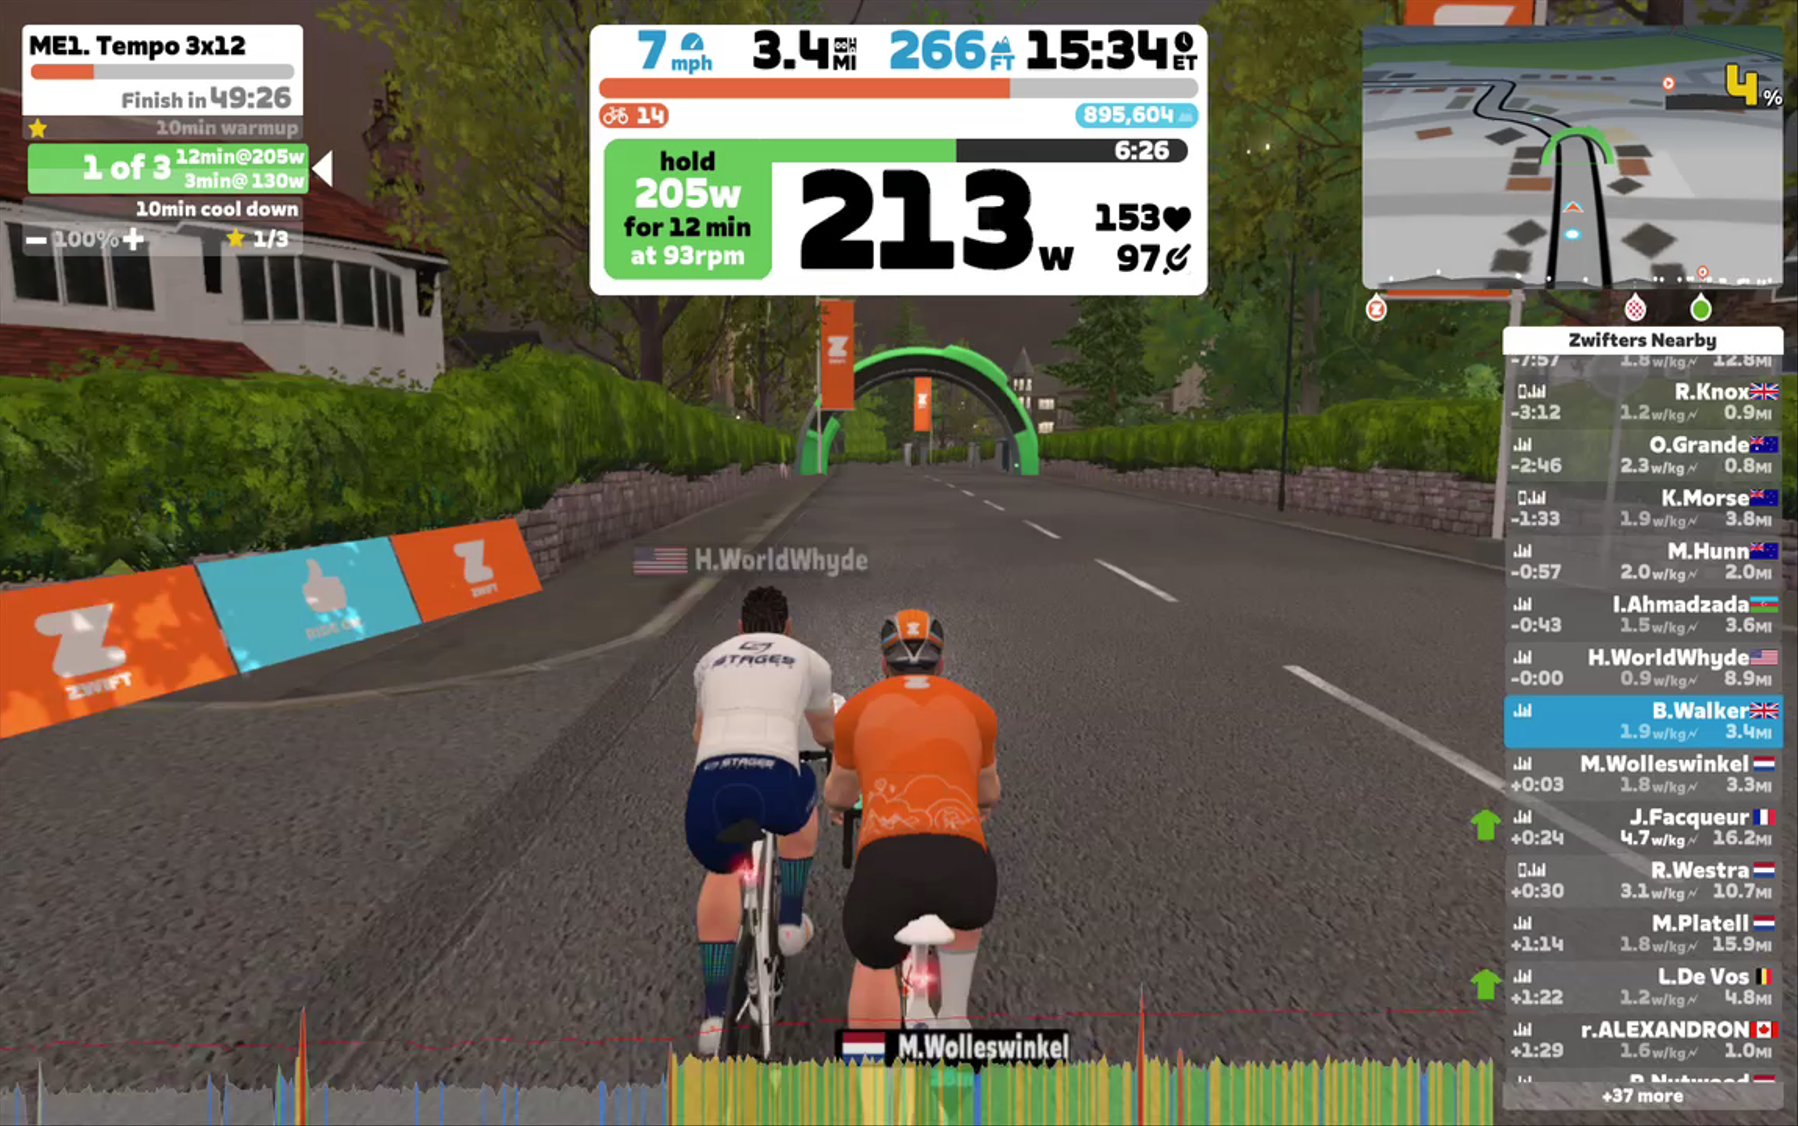 Zwift - ME1. Tempo 3x12 in Yorkshire